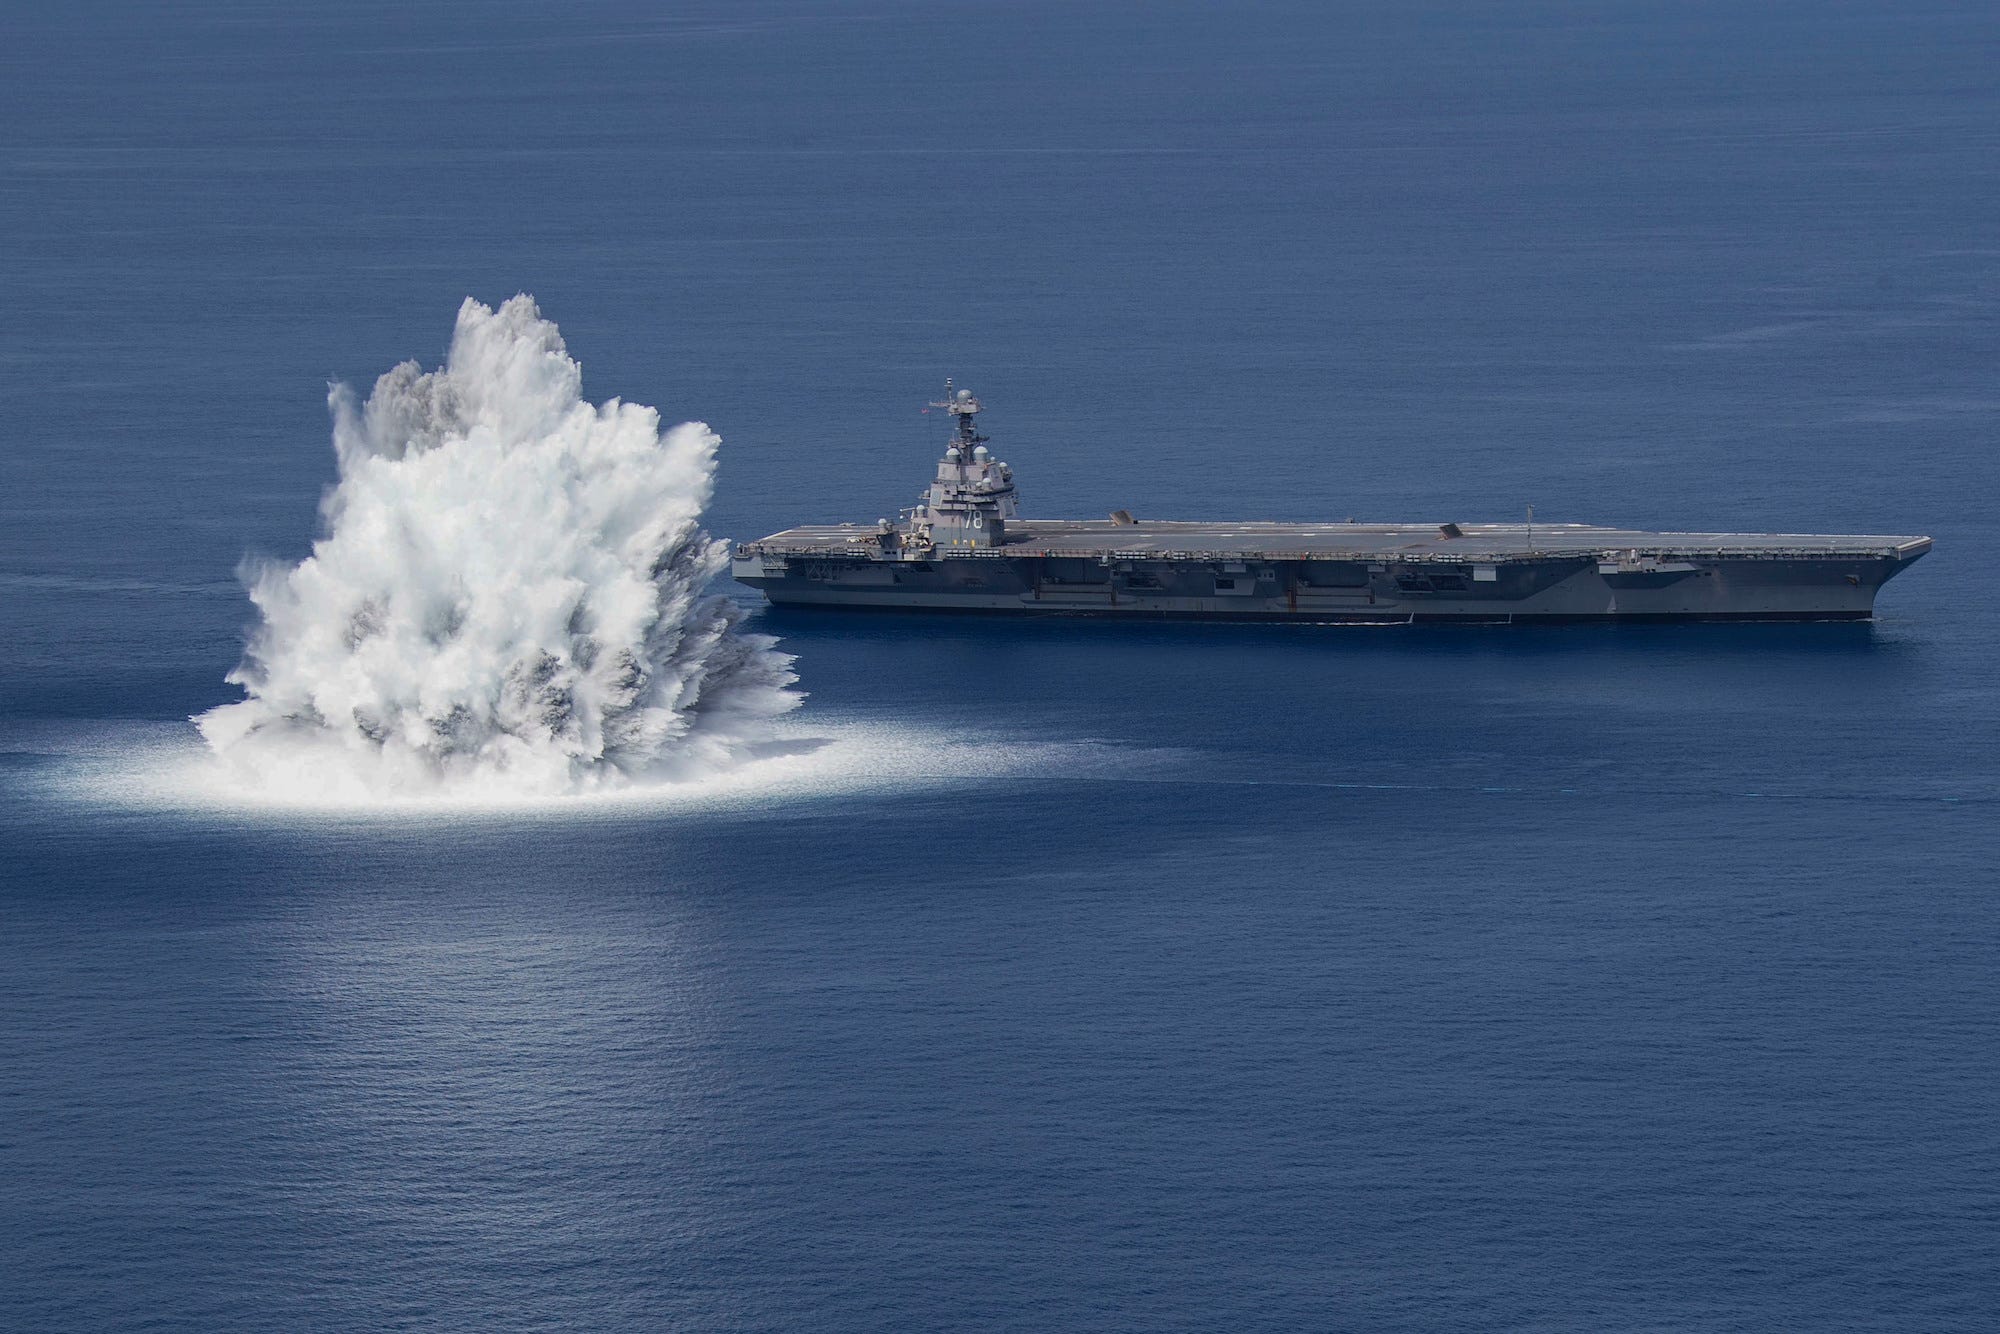 Navy aircraft carrier Gerald Ford during shock trials